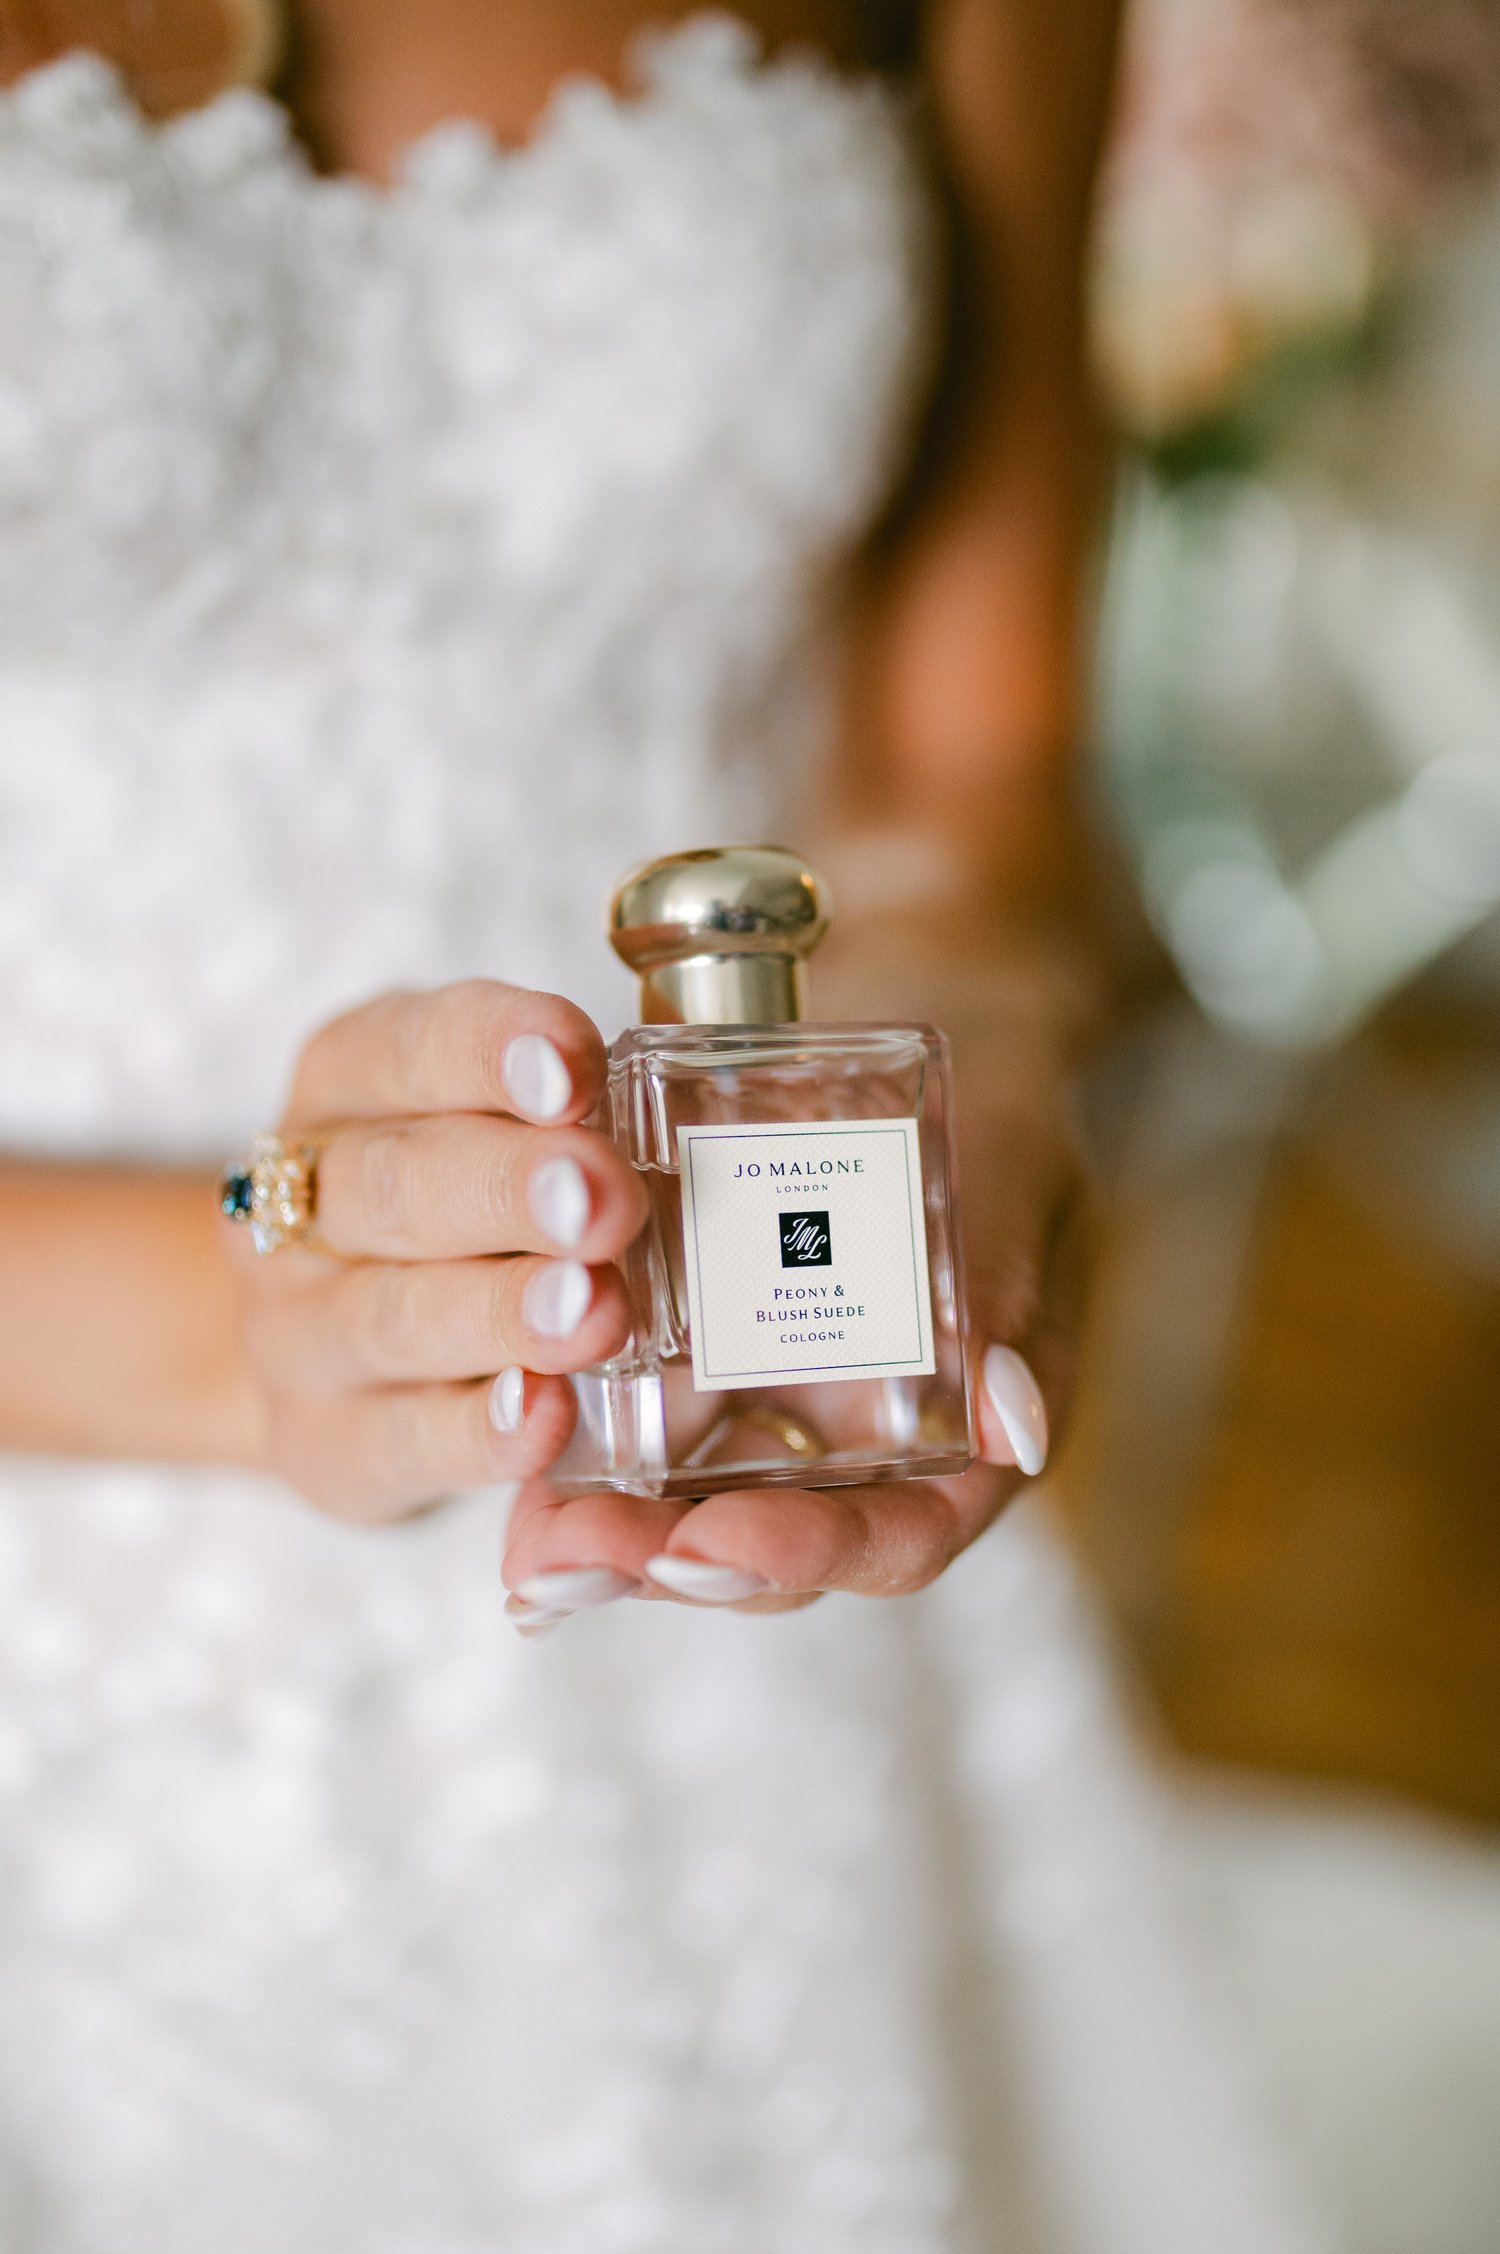 Elm Estate Wedding photos, photo of the wedding day Jo Malone fragrance worn by the bride on her wedding day